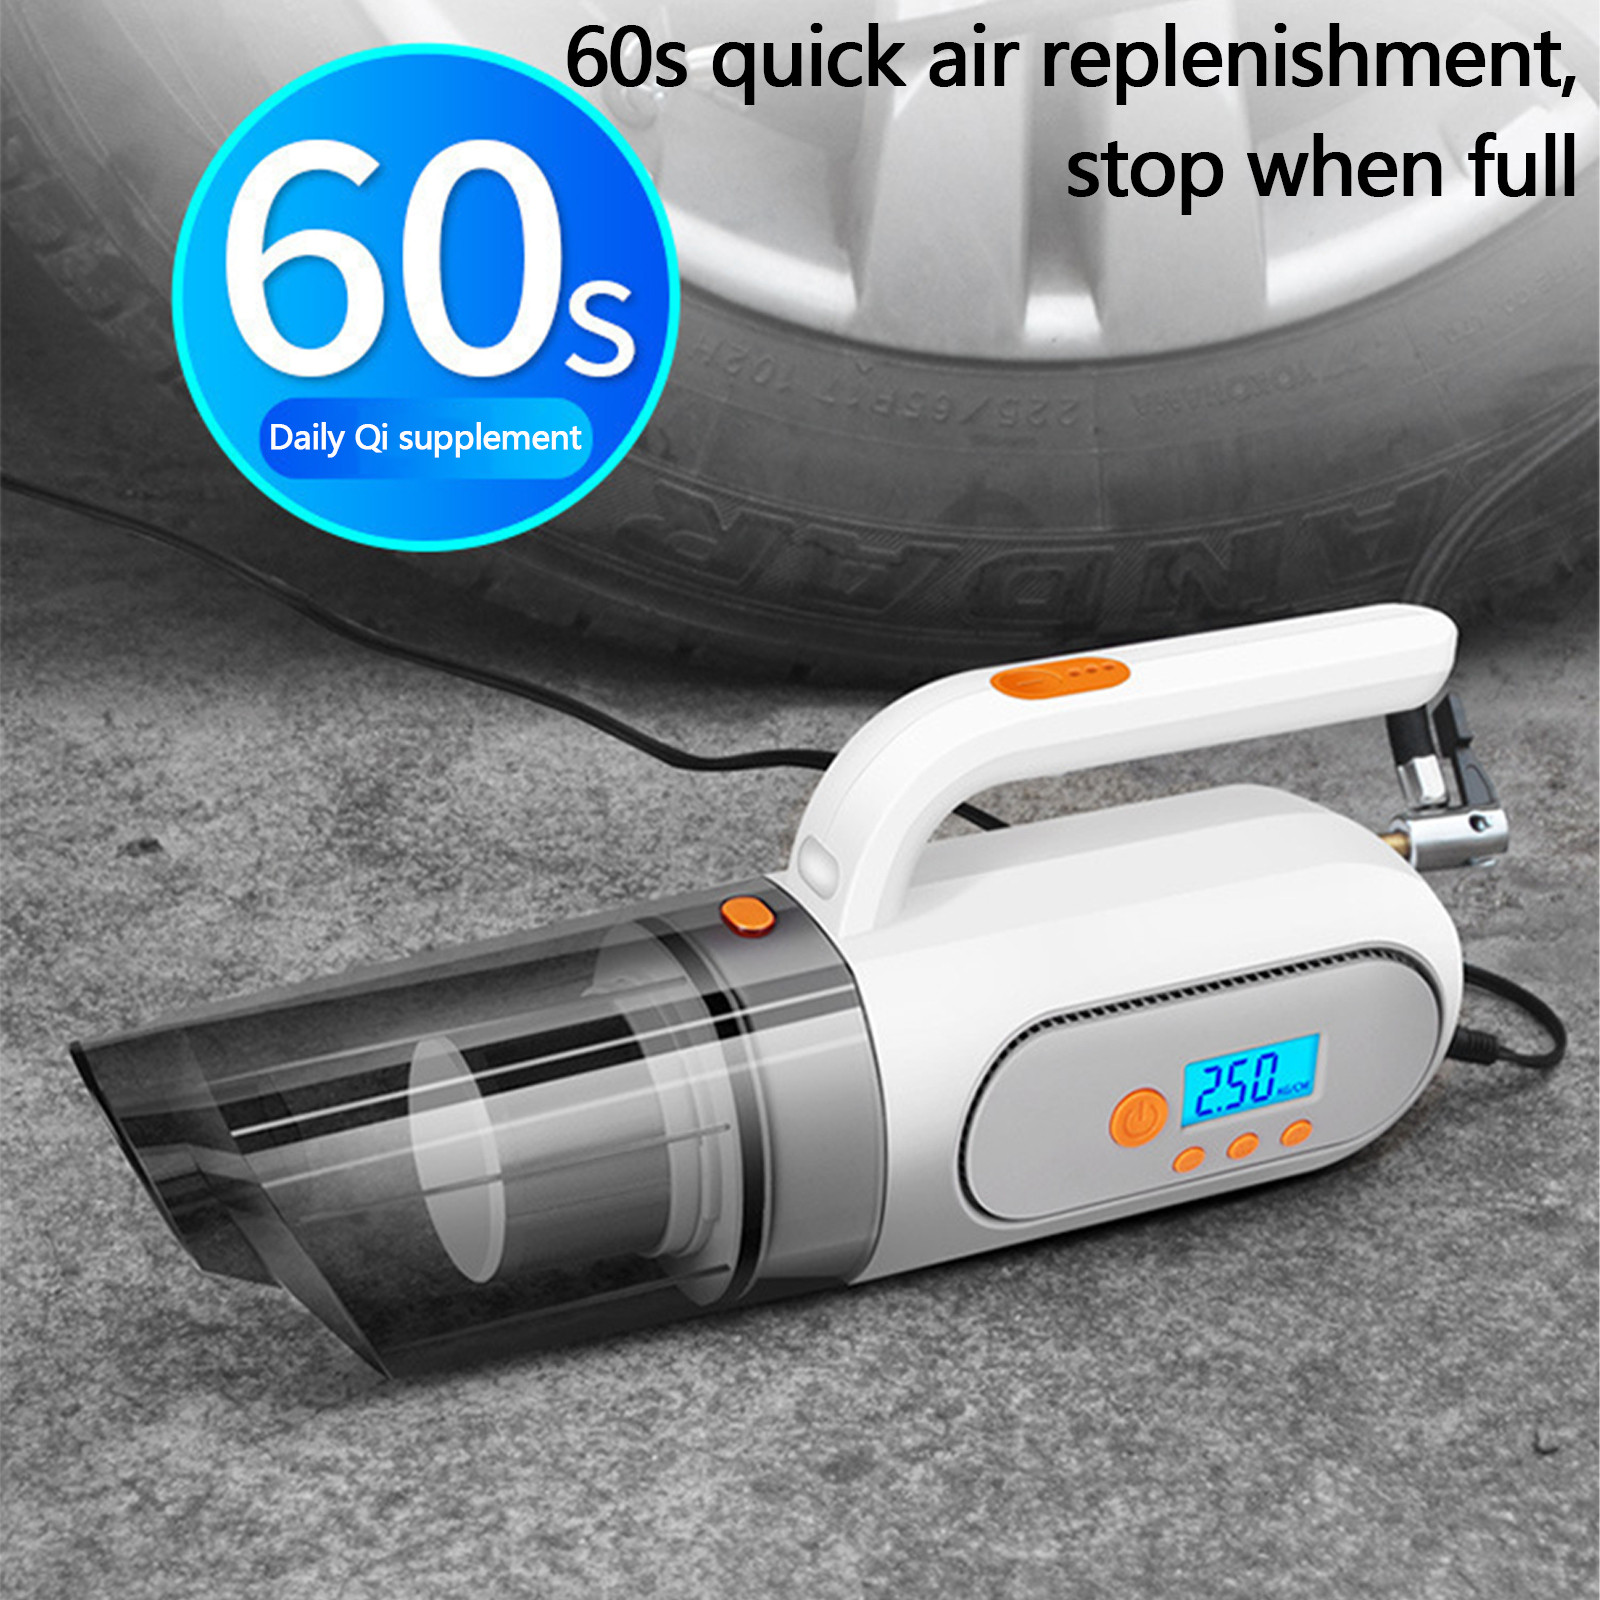 SUWHWEA Vacuum Cleaner Car Vacuum Handheld Cleaner,Tire Inflator For Car,12V  Auto Shut Off Air Compressor With Led Light,4 In Portable Vacuum Cleaner  With Air Pump On Clearance Great Gifts